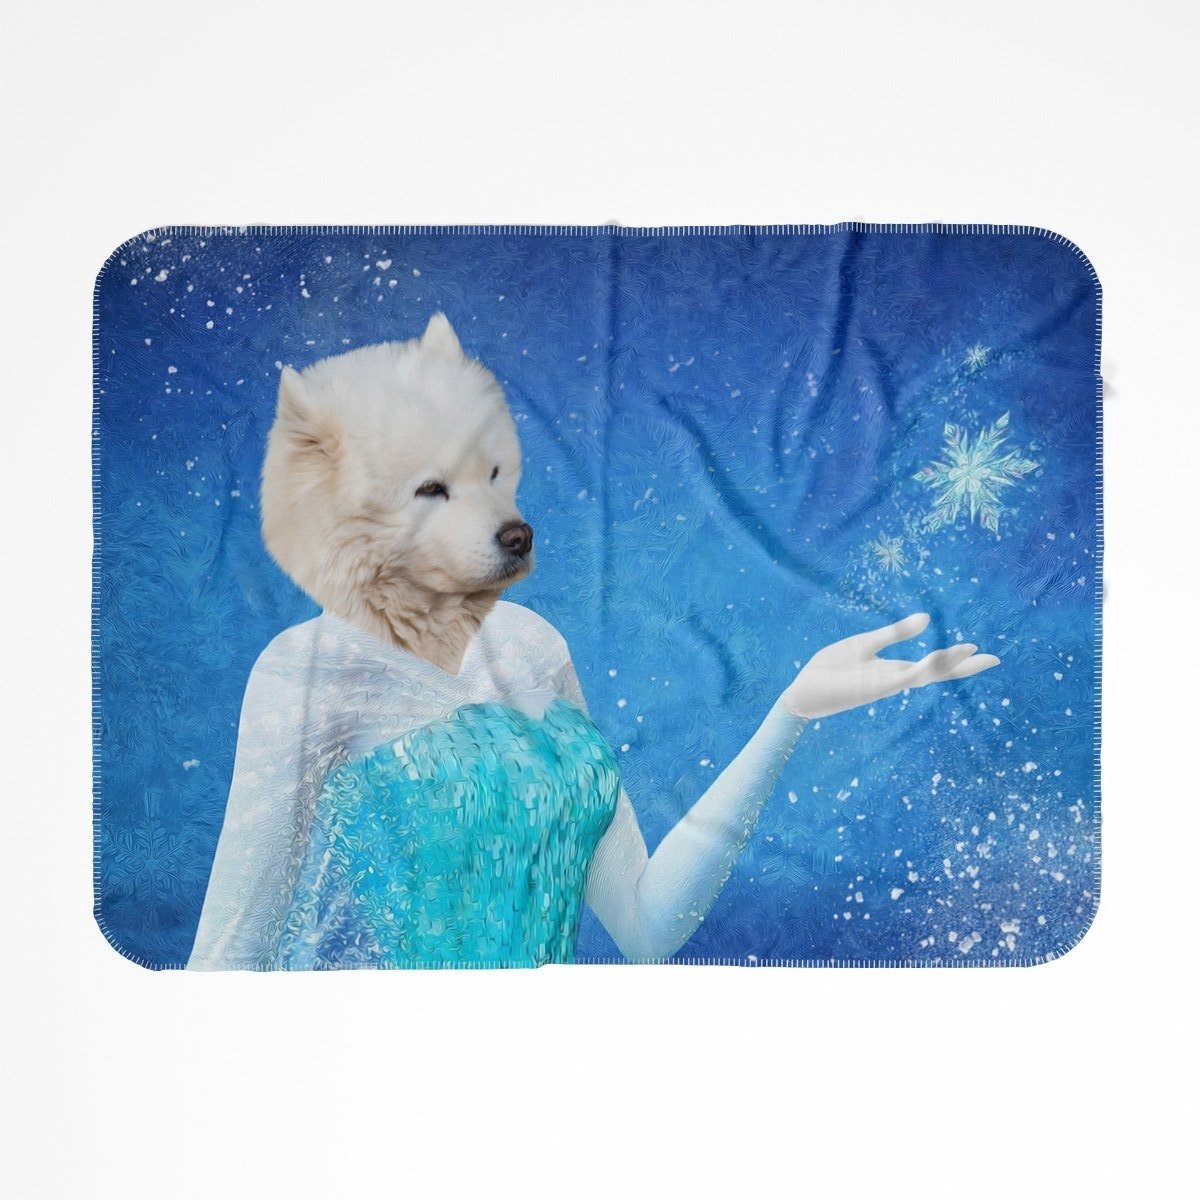 Elsa (Frozen Inspired): Custom Pet Blanket - Paw & Glory - #pet portraits# - #dog portraits# - #pet portraits uk#Paw and glory, Pet portraits blanket,custom cat blankets, my dog blanket, custom cat face blanket, blanket with my dogs face on it, dog that looks like a blanket